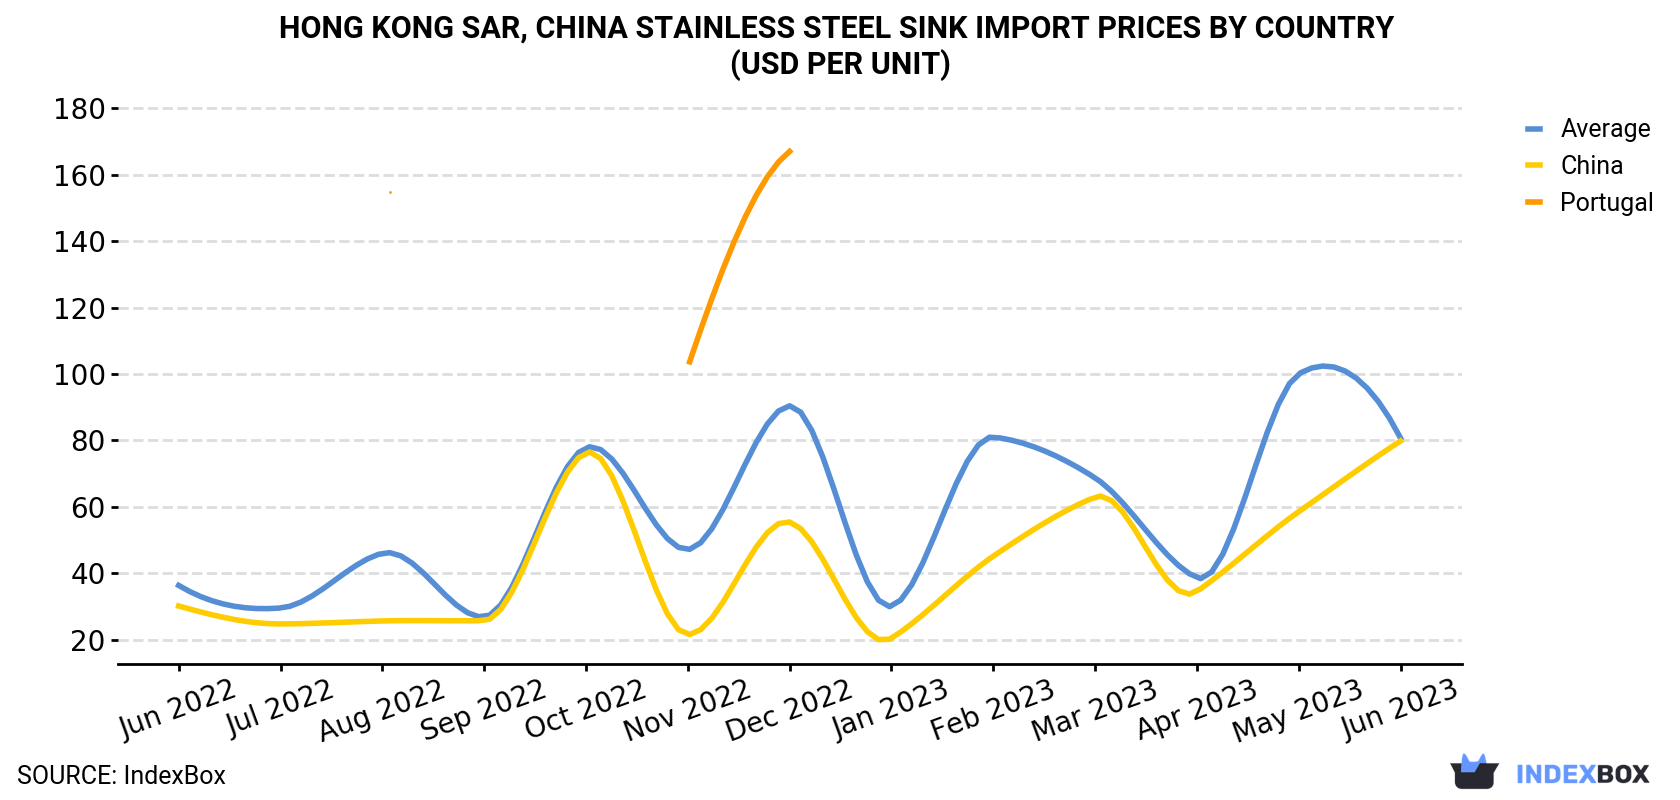 Hong Kong Stainless Steel Sink Import Prices By Country (USD Per Unit)